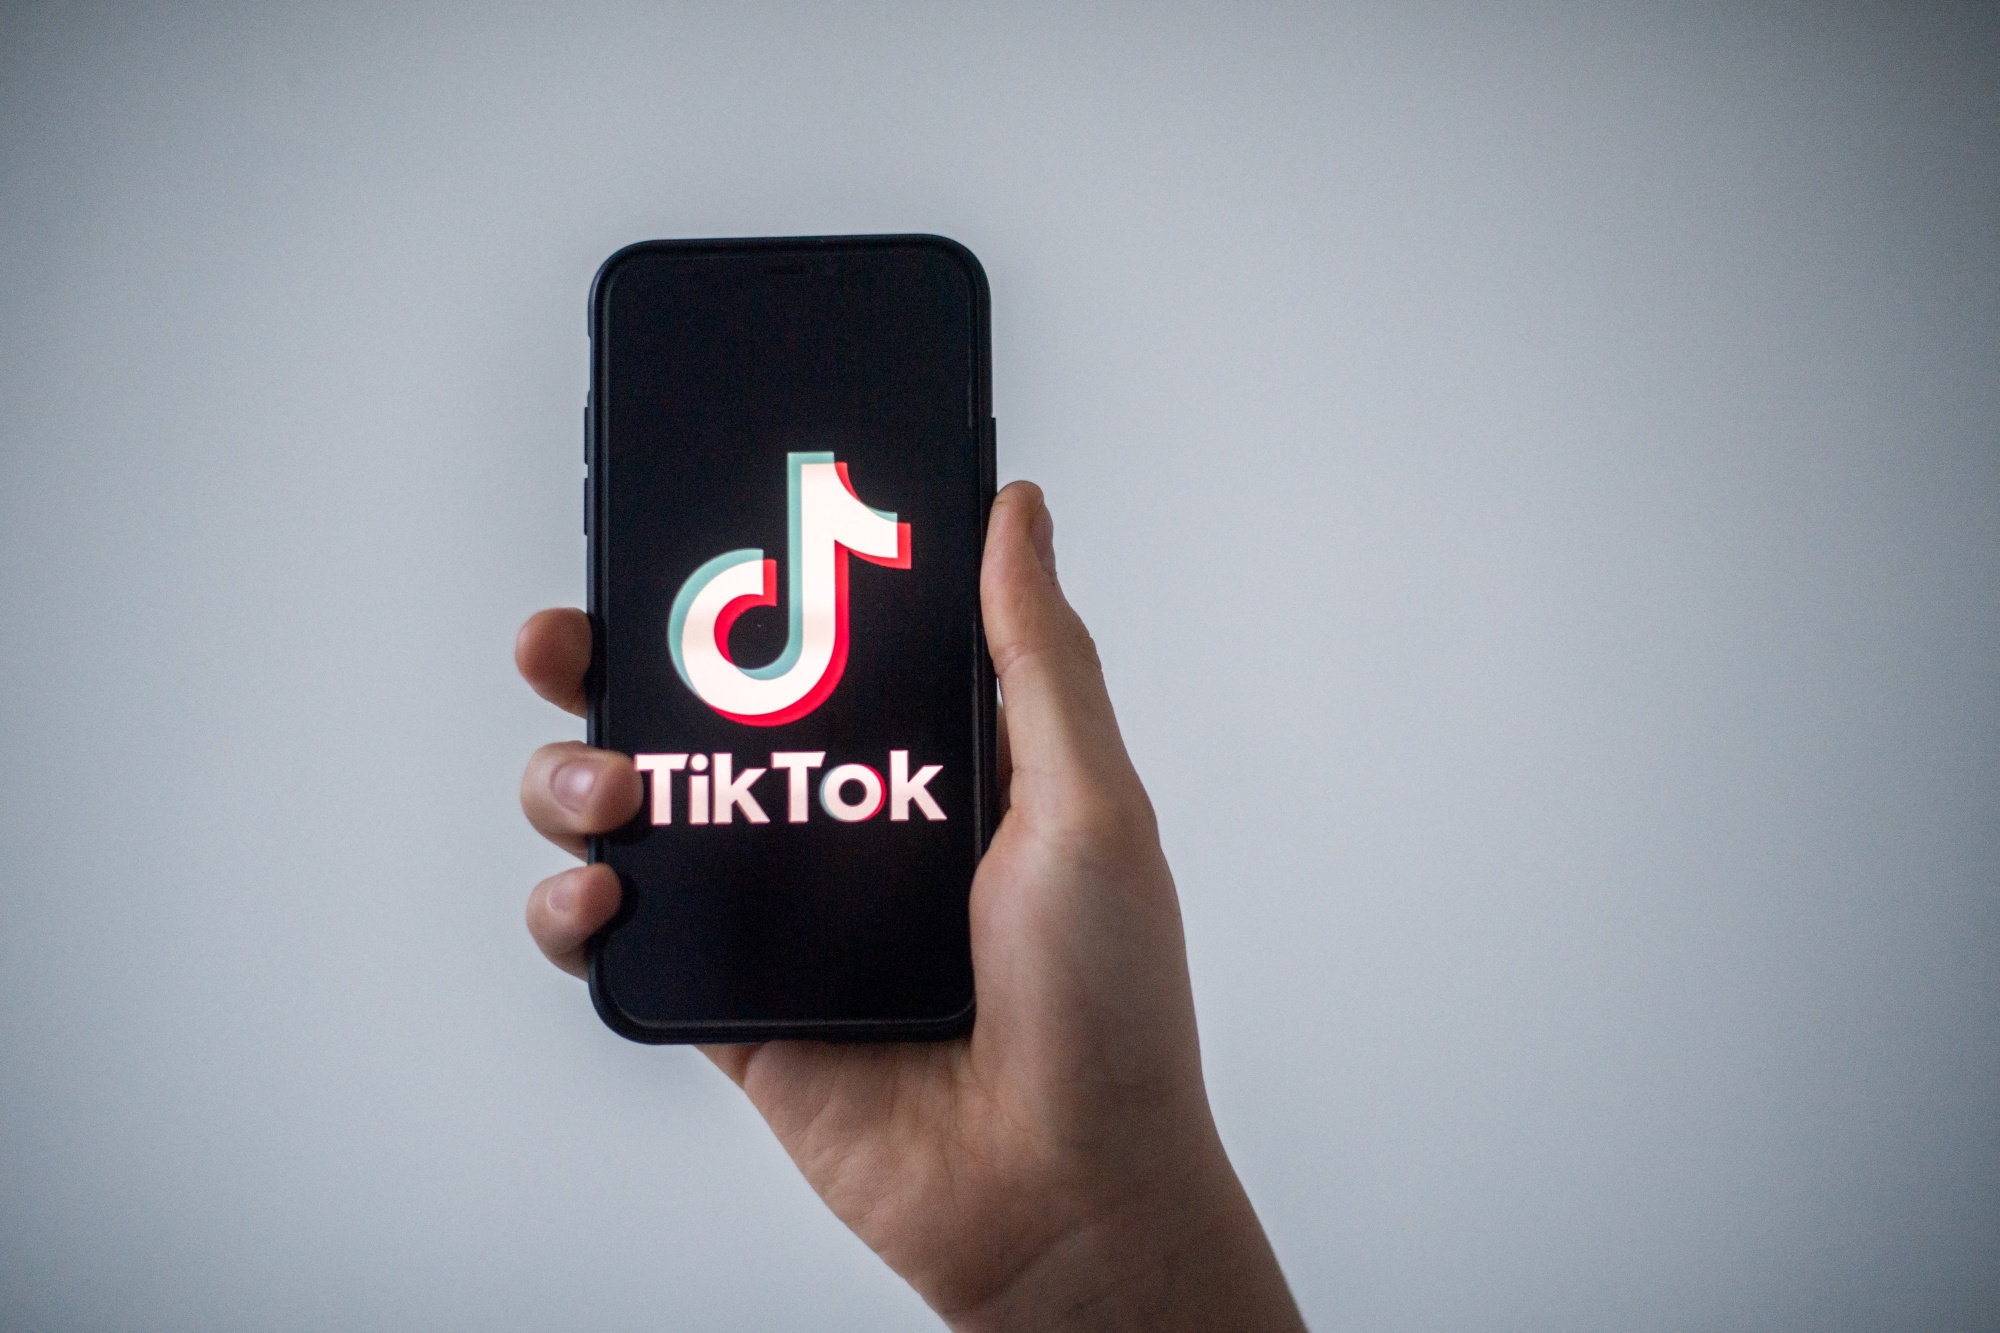 Montana's Statewide TikTok Ban Questioned by Federal Judge - Bloomberg